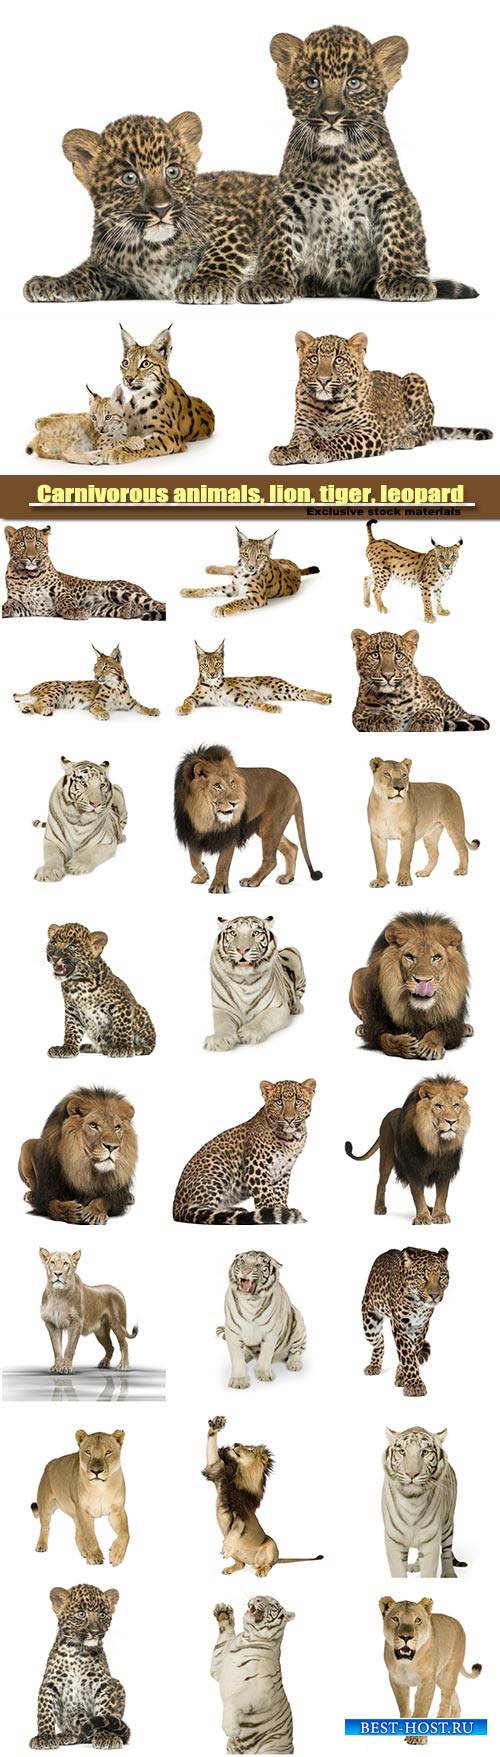 Carnivorous animals, lion, tiger, leopard and lynx